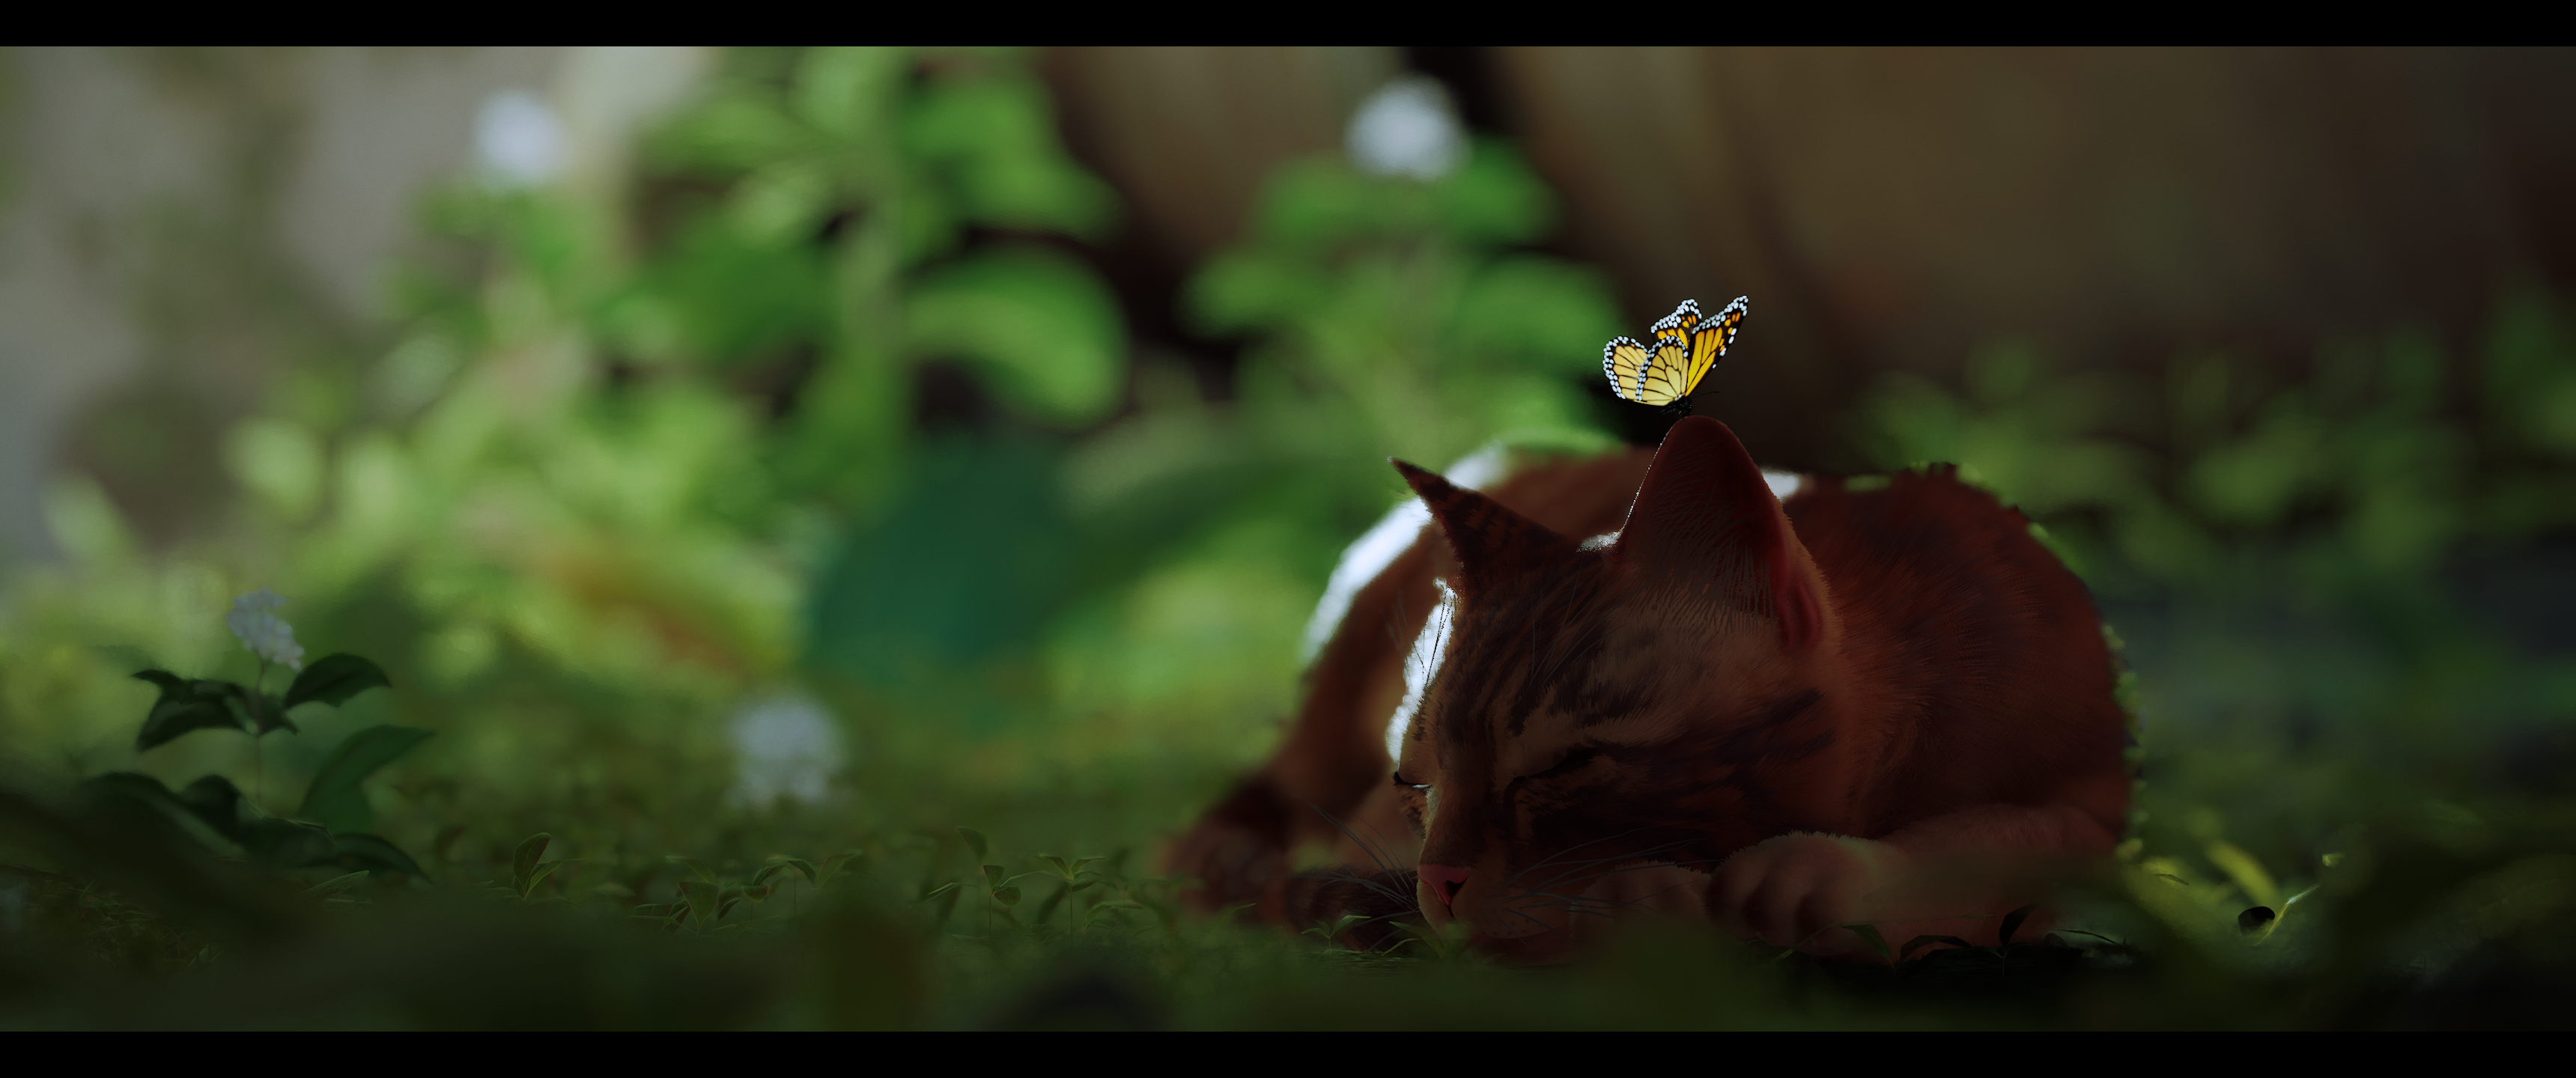 General 3440x1440 Stray animals video game animals screen shot cats butterfly video games